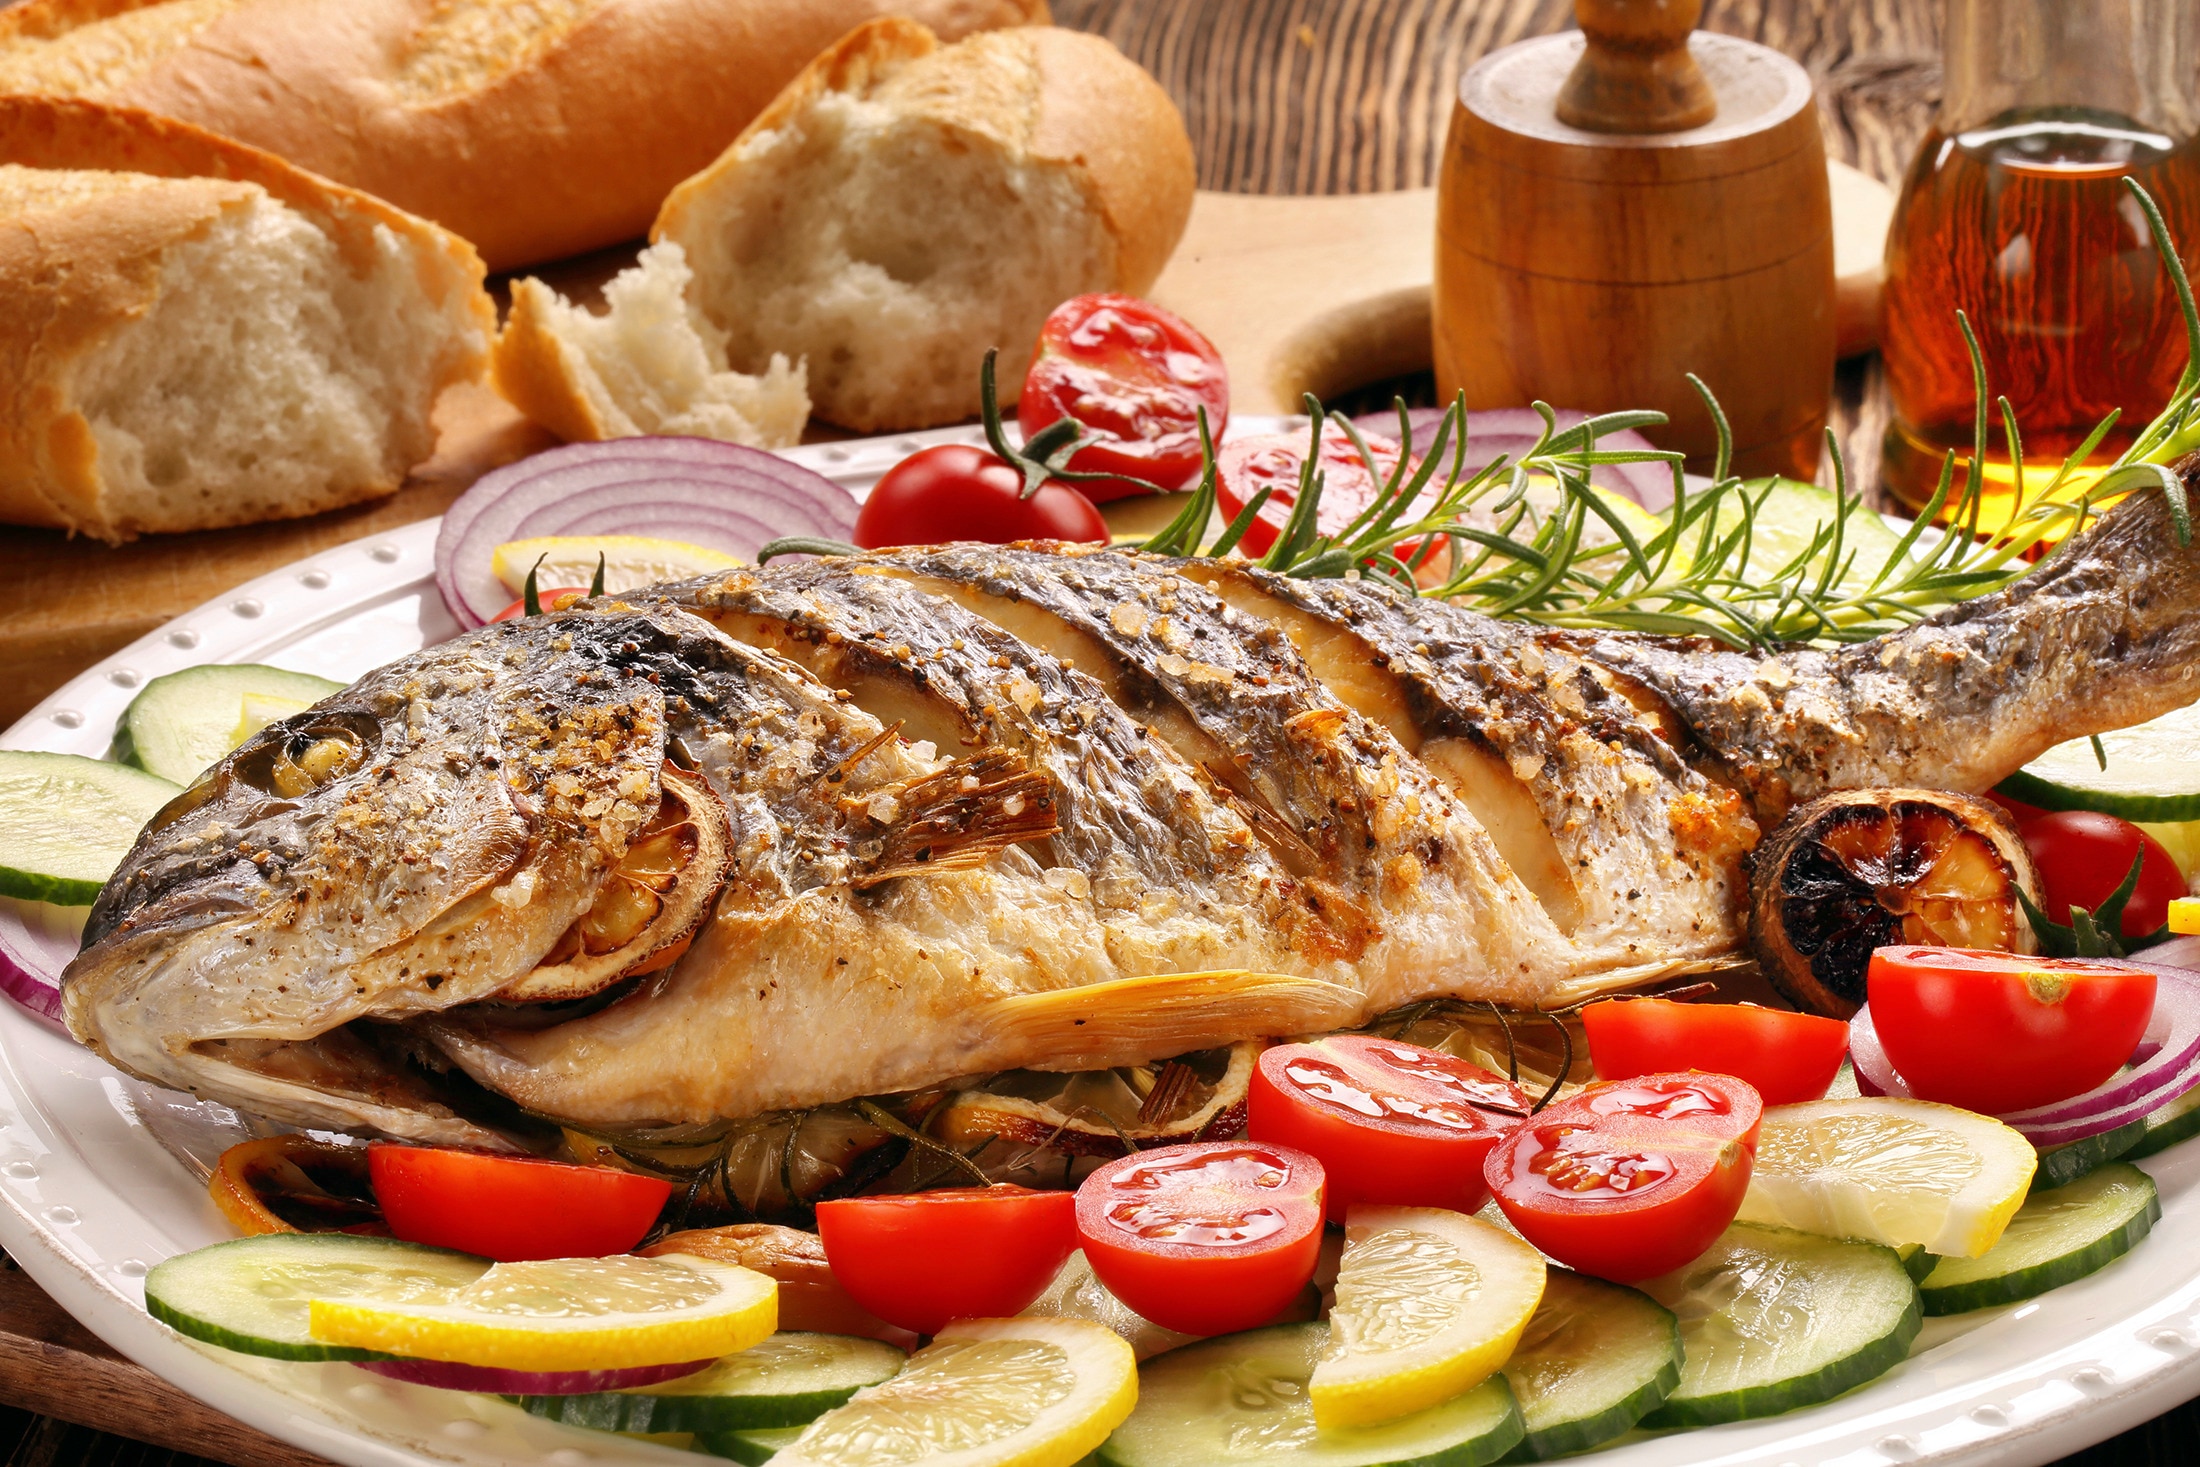 A platter of grilled fish on a bed of fresh vegetables